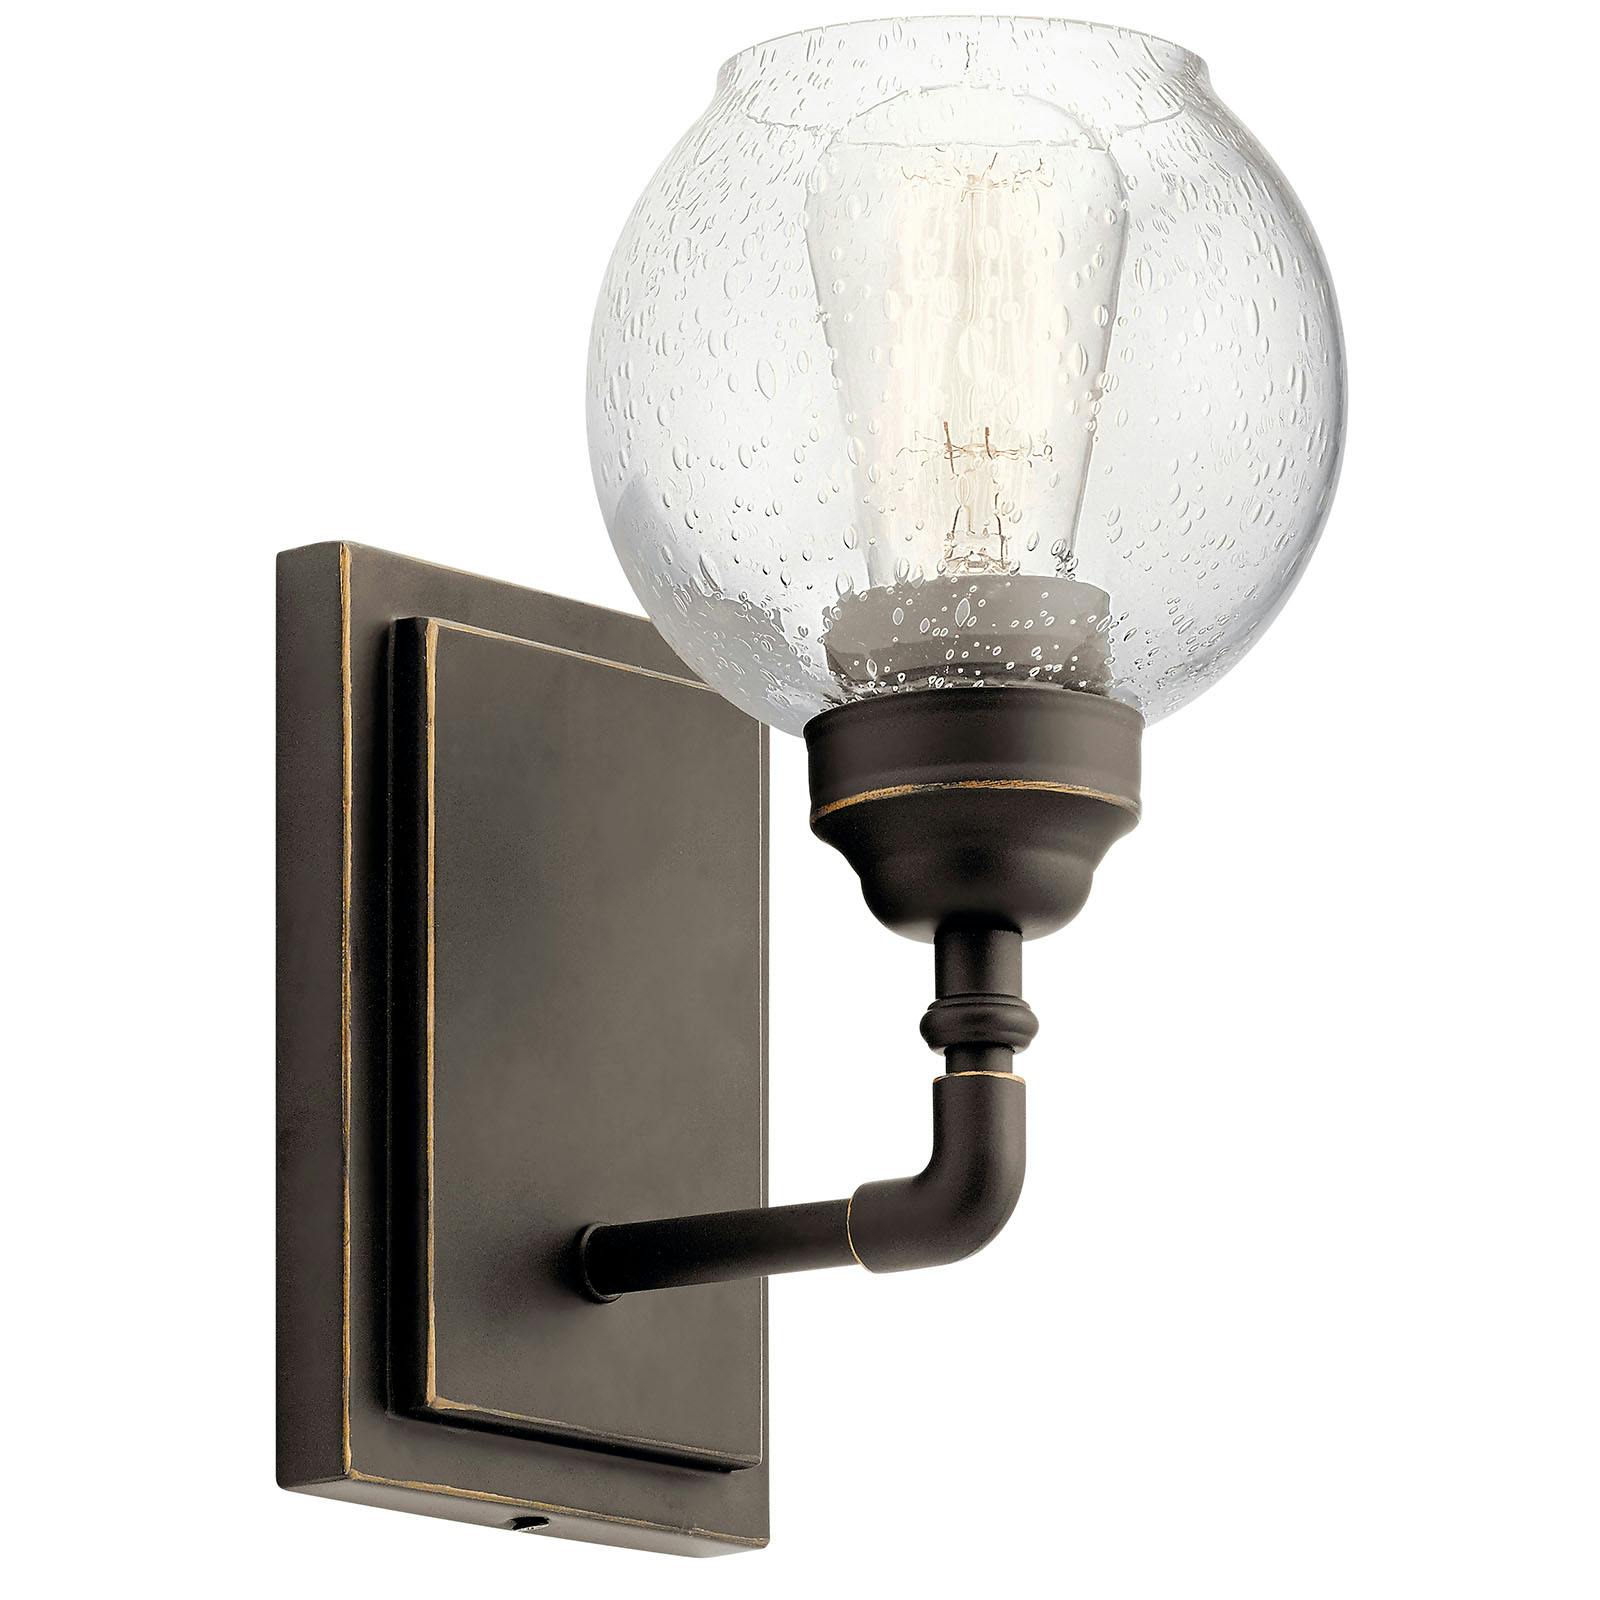 Niles 1 Light Wall Sconce Olde Bronze® on a white background